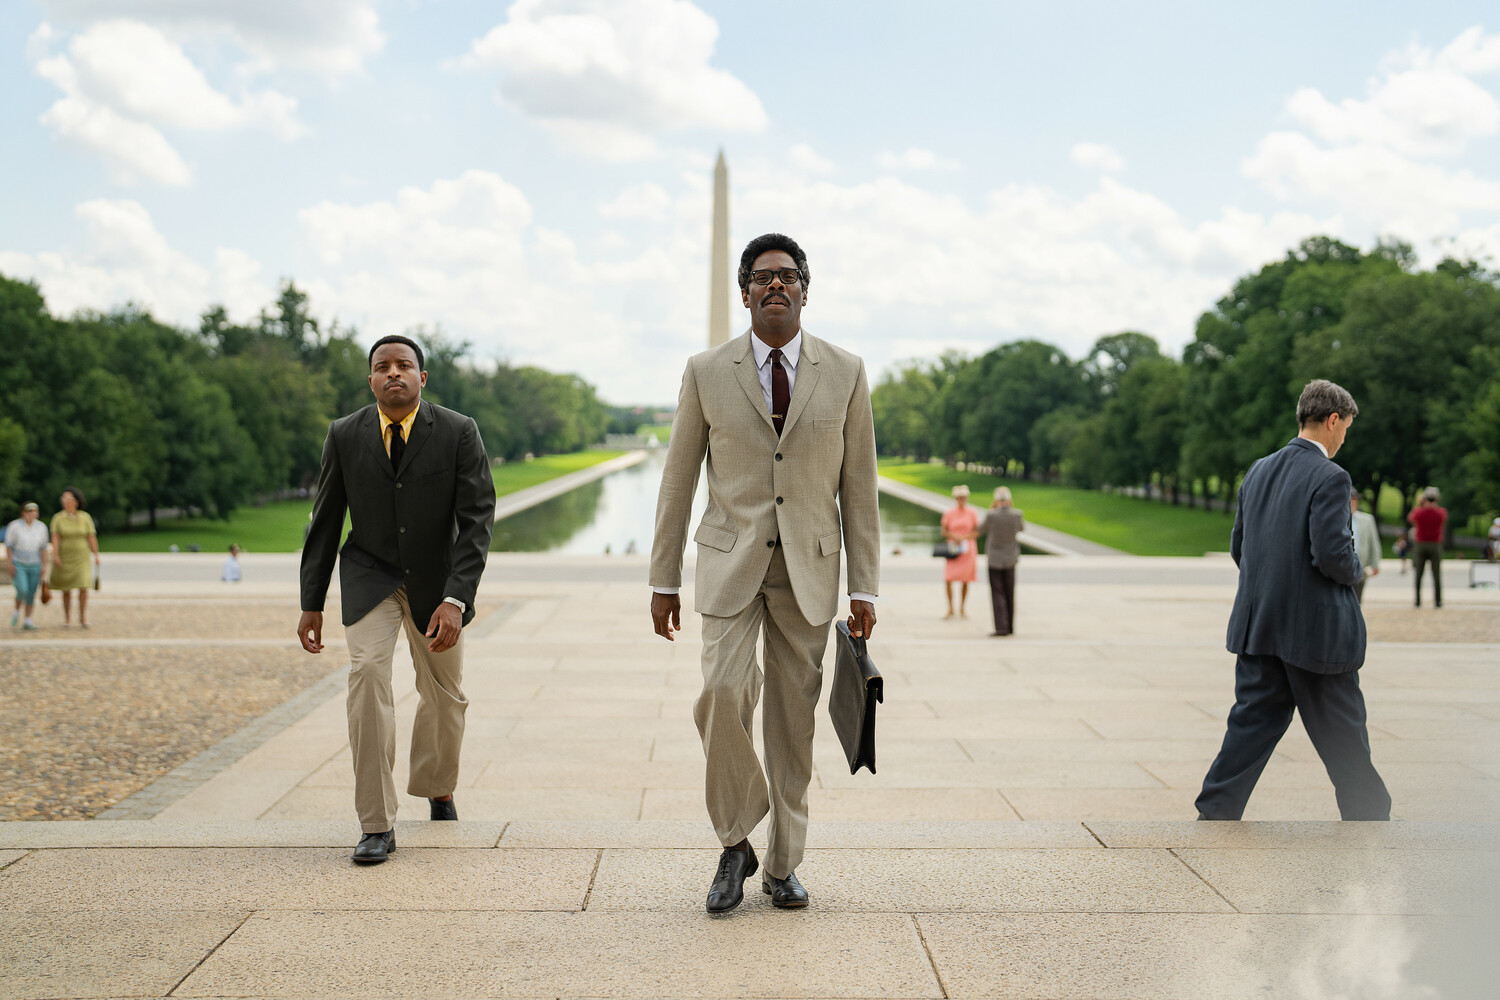 Left, Aml Ameen as Martin Luther King and Colman Domingo as Bayard Rustin in George C. Wolfe’s film 